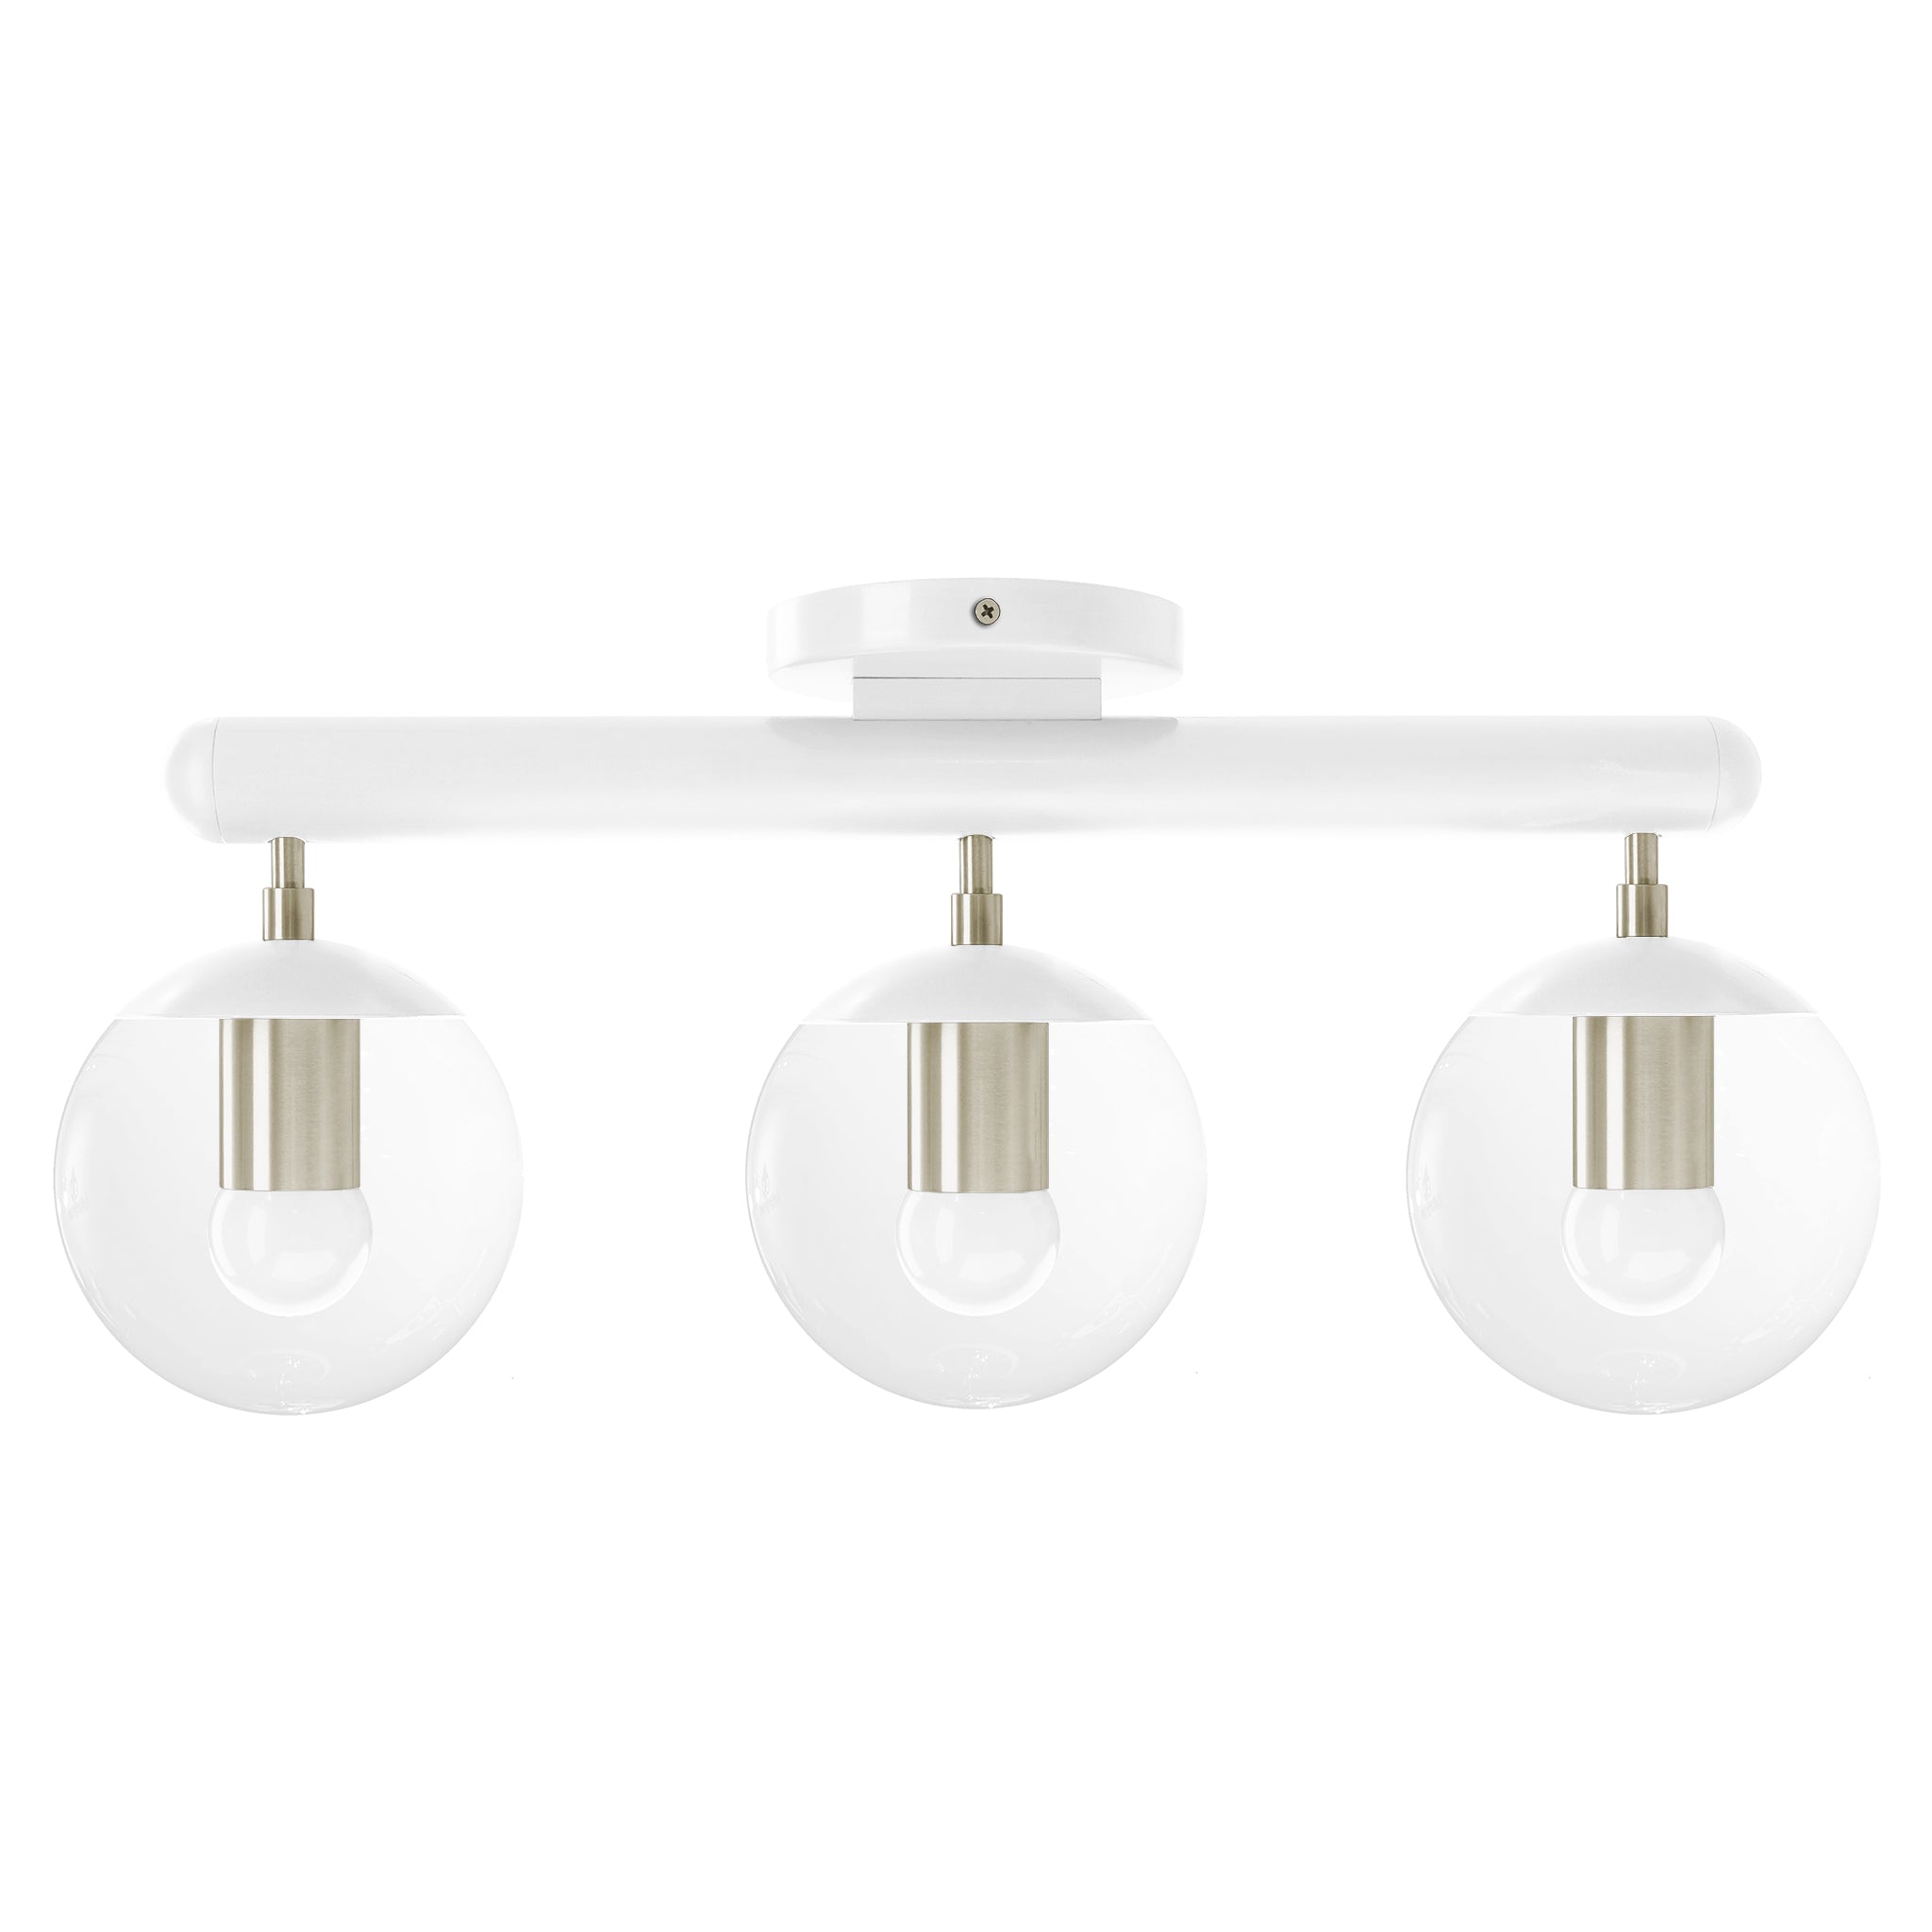 Nickel and white color Icon 3 flush mount Dutton Brown lighting